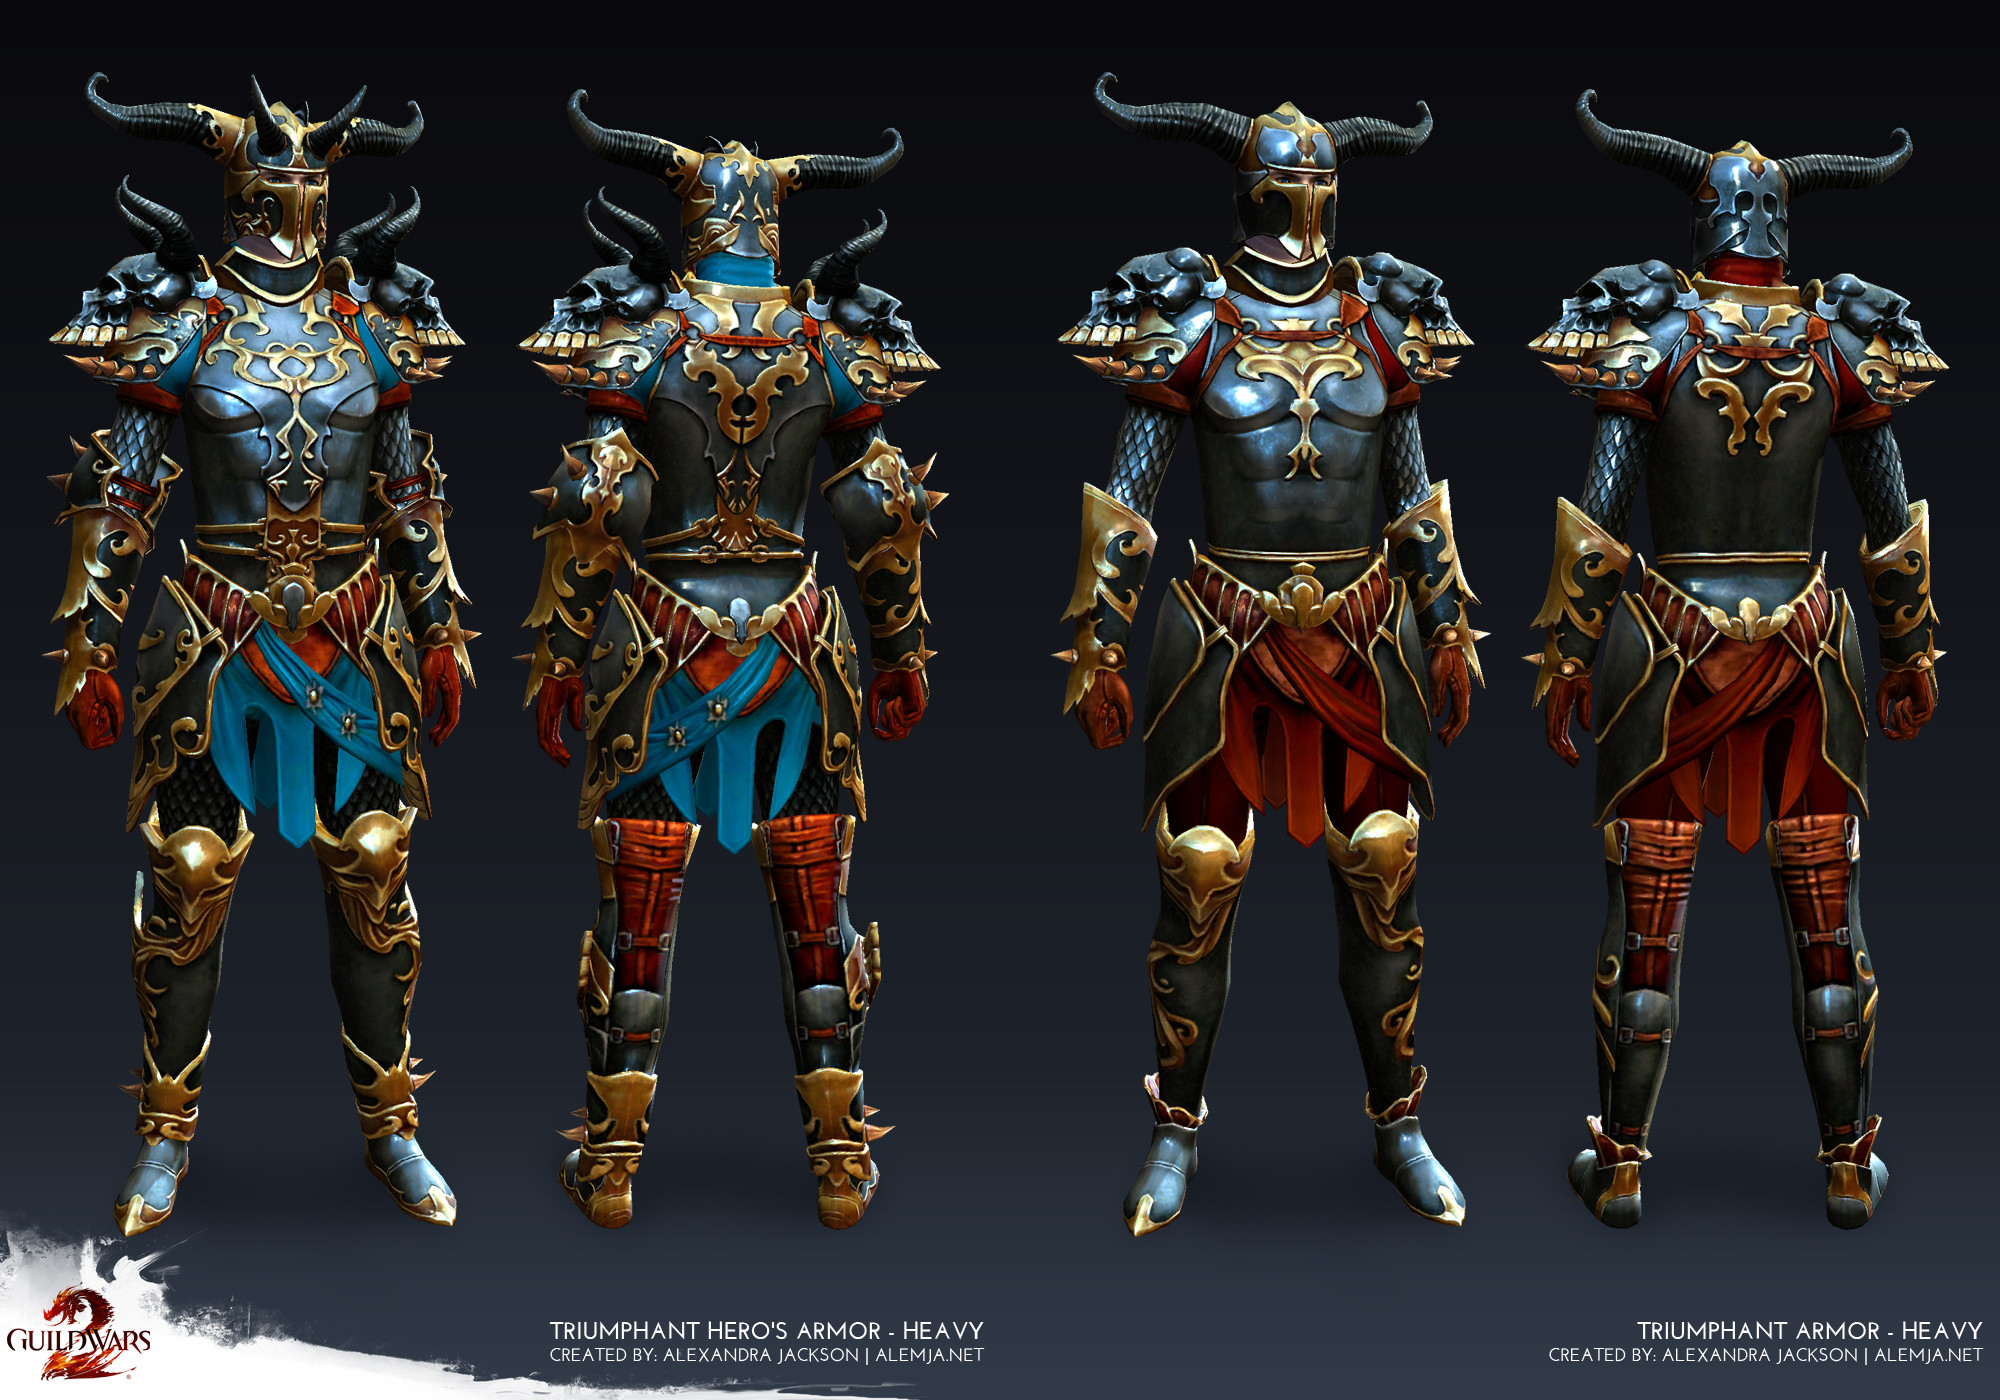 Worked on the armor game ready model and texures. I made sure as much as possible was reused as possible between the 2 tiers. This set was added as a reward tier for the in-game mode World vs World